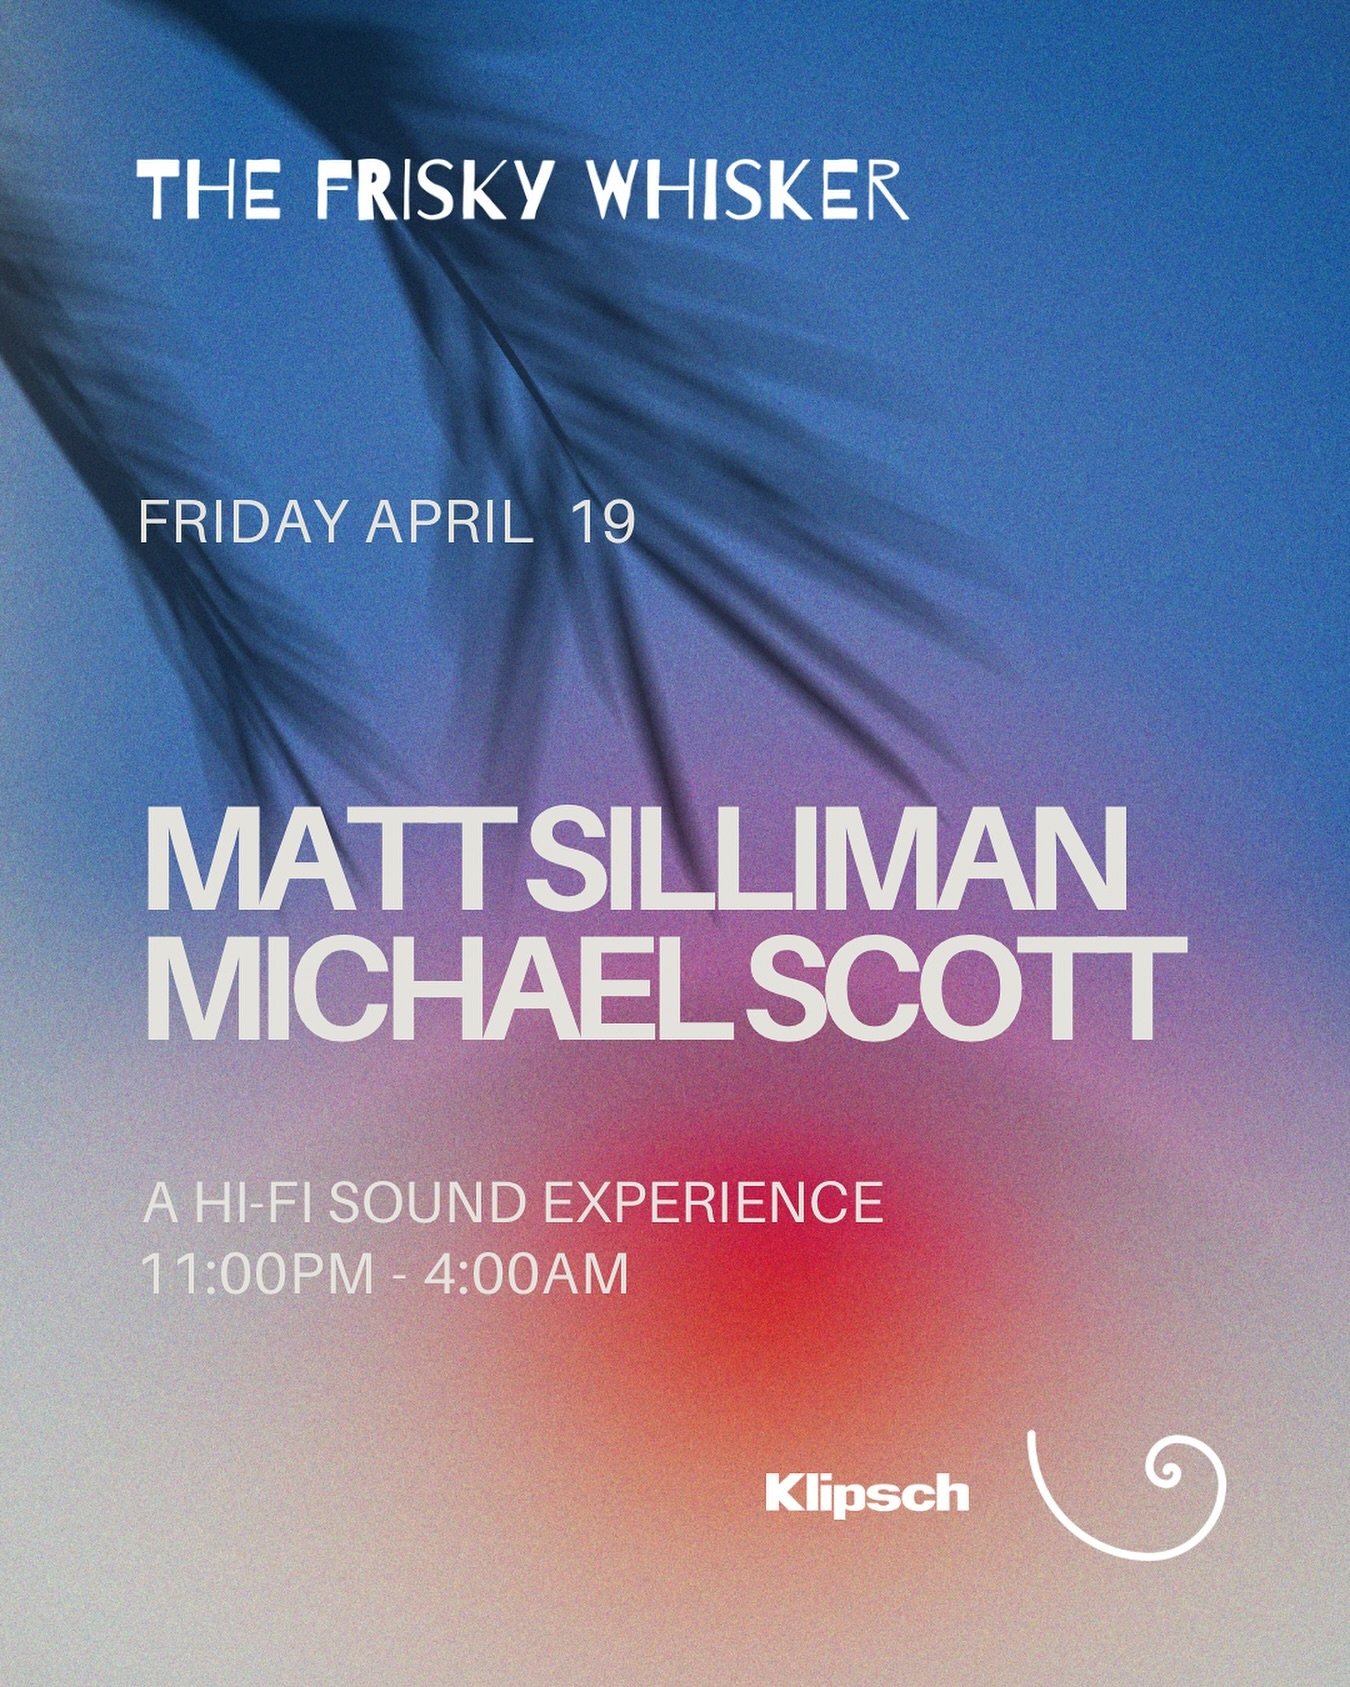 Friday night in the Sound Gallery 👀

We welcome Atlanta legends @mattsilliman_dj &amp; Micheal Scott of @peopleofearth_music, for an all night music extravaganza. 
They&rsquo;ll be bringing the deep, soulful and sultry house music for your body, min